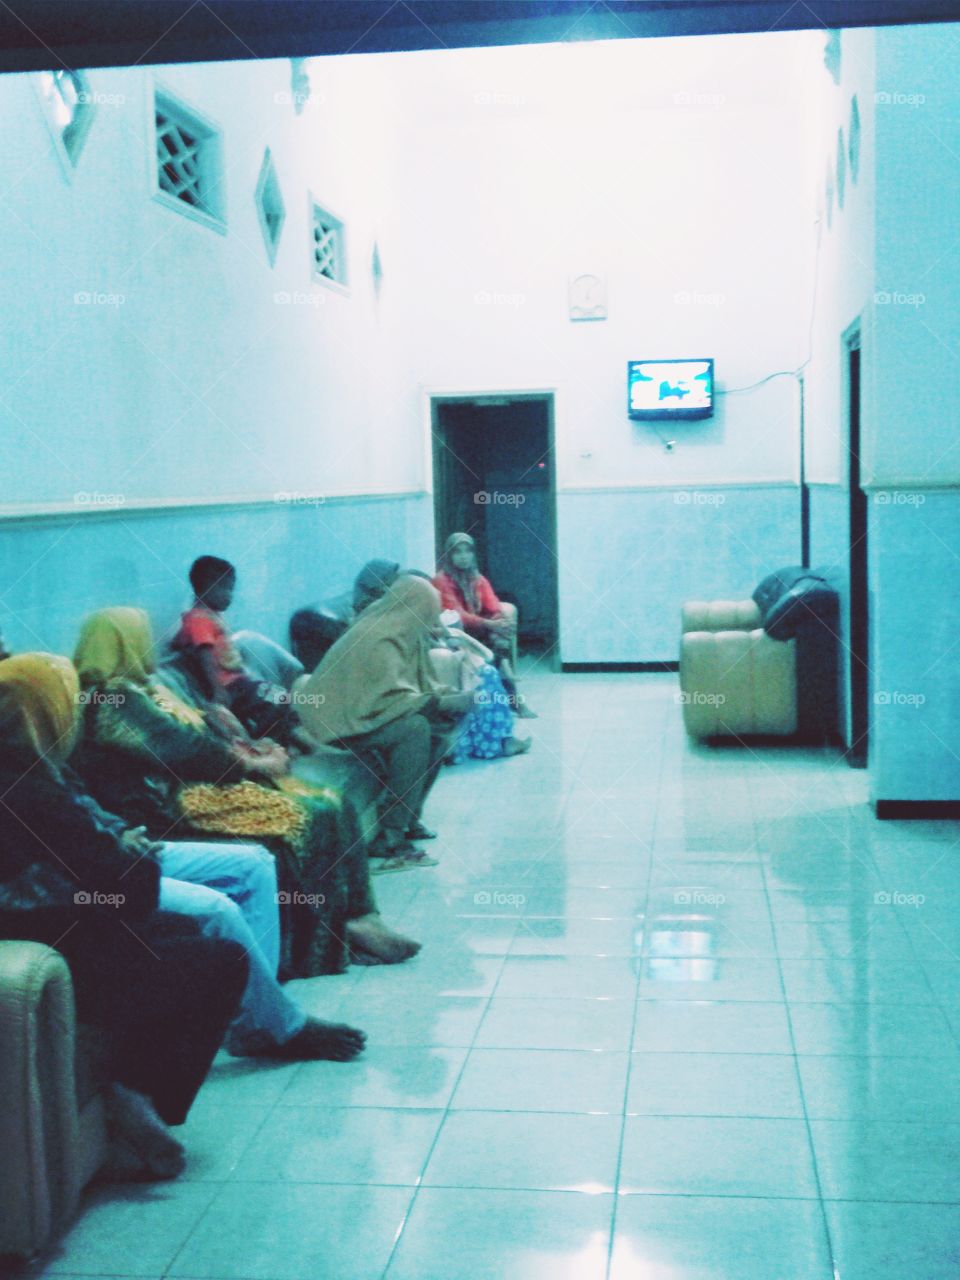 Queue Waiting Doctor Coming, the sick soon need the medicine to get well soon. Habit in Indonesia, money is more important than the life. The Poor is forbidden Sick.